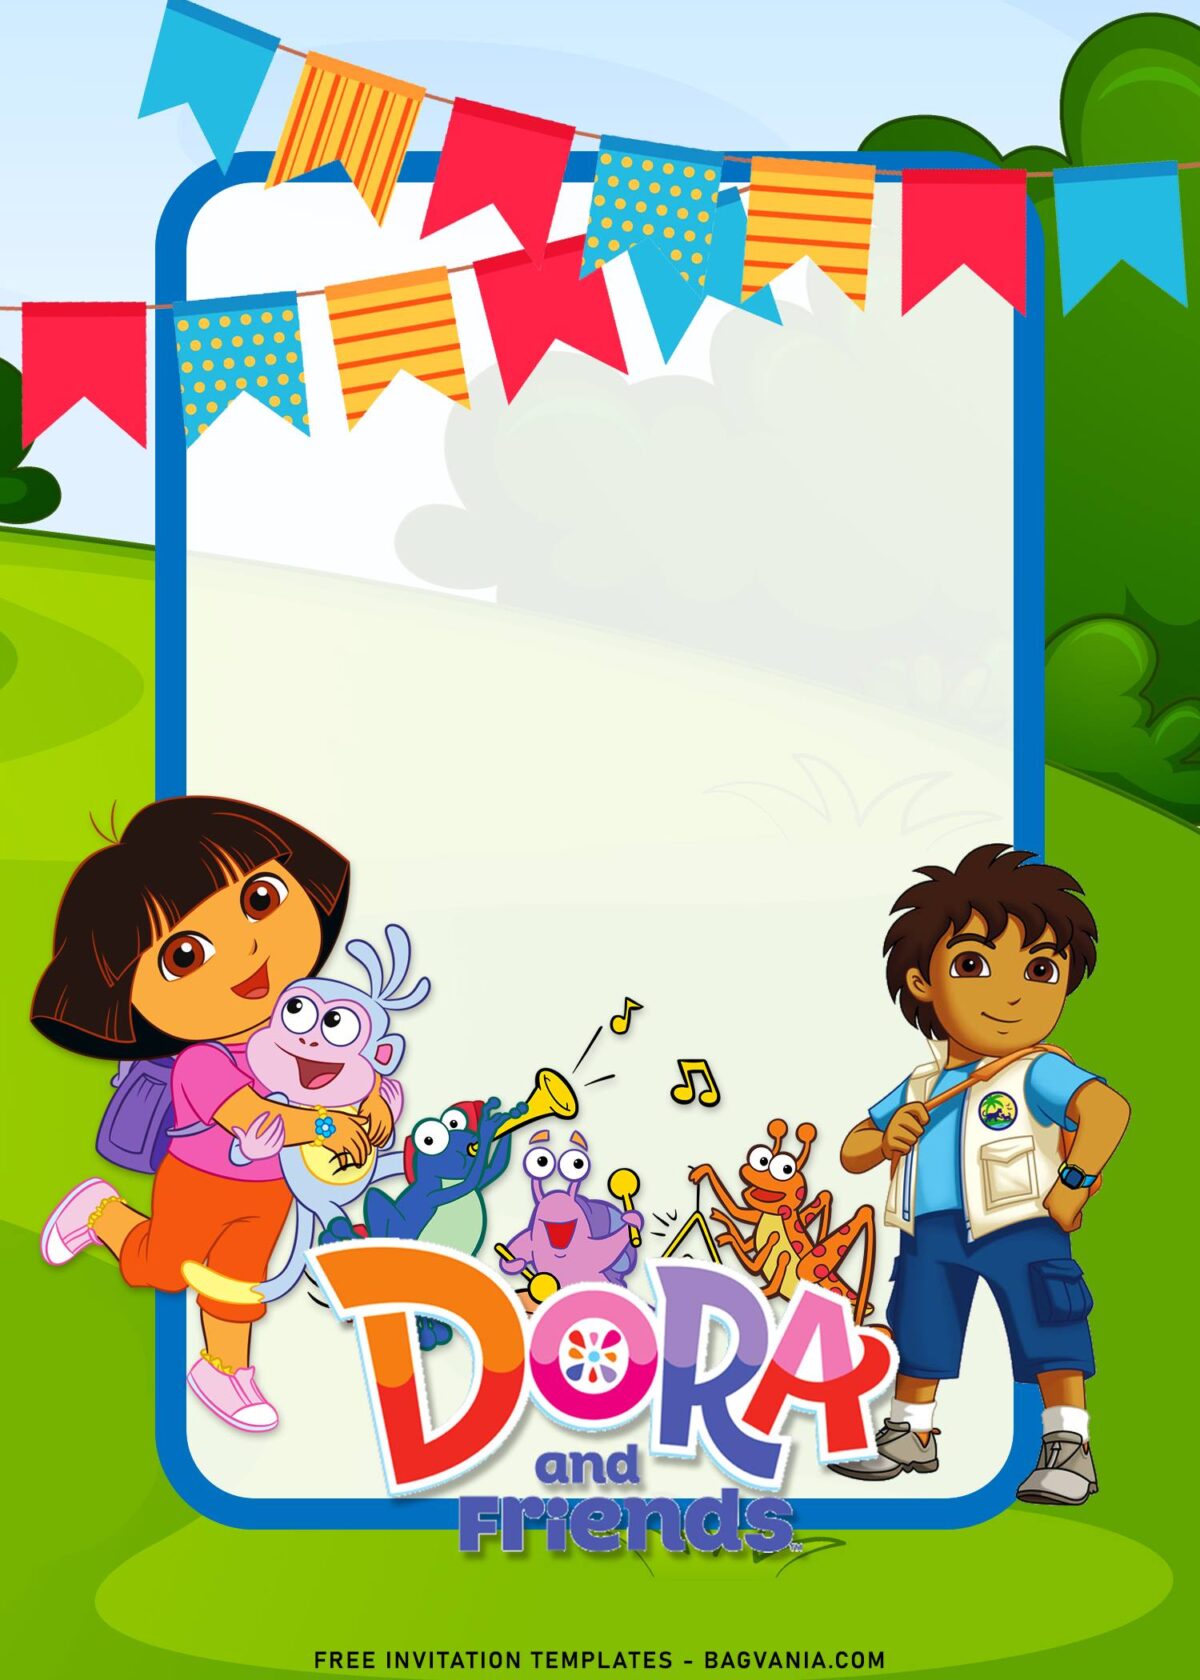 8+ Dora The Explorer Birthday Invitation Templates with Diego and the crickets band